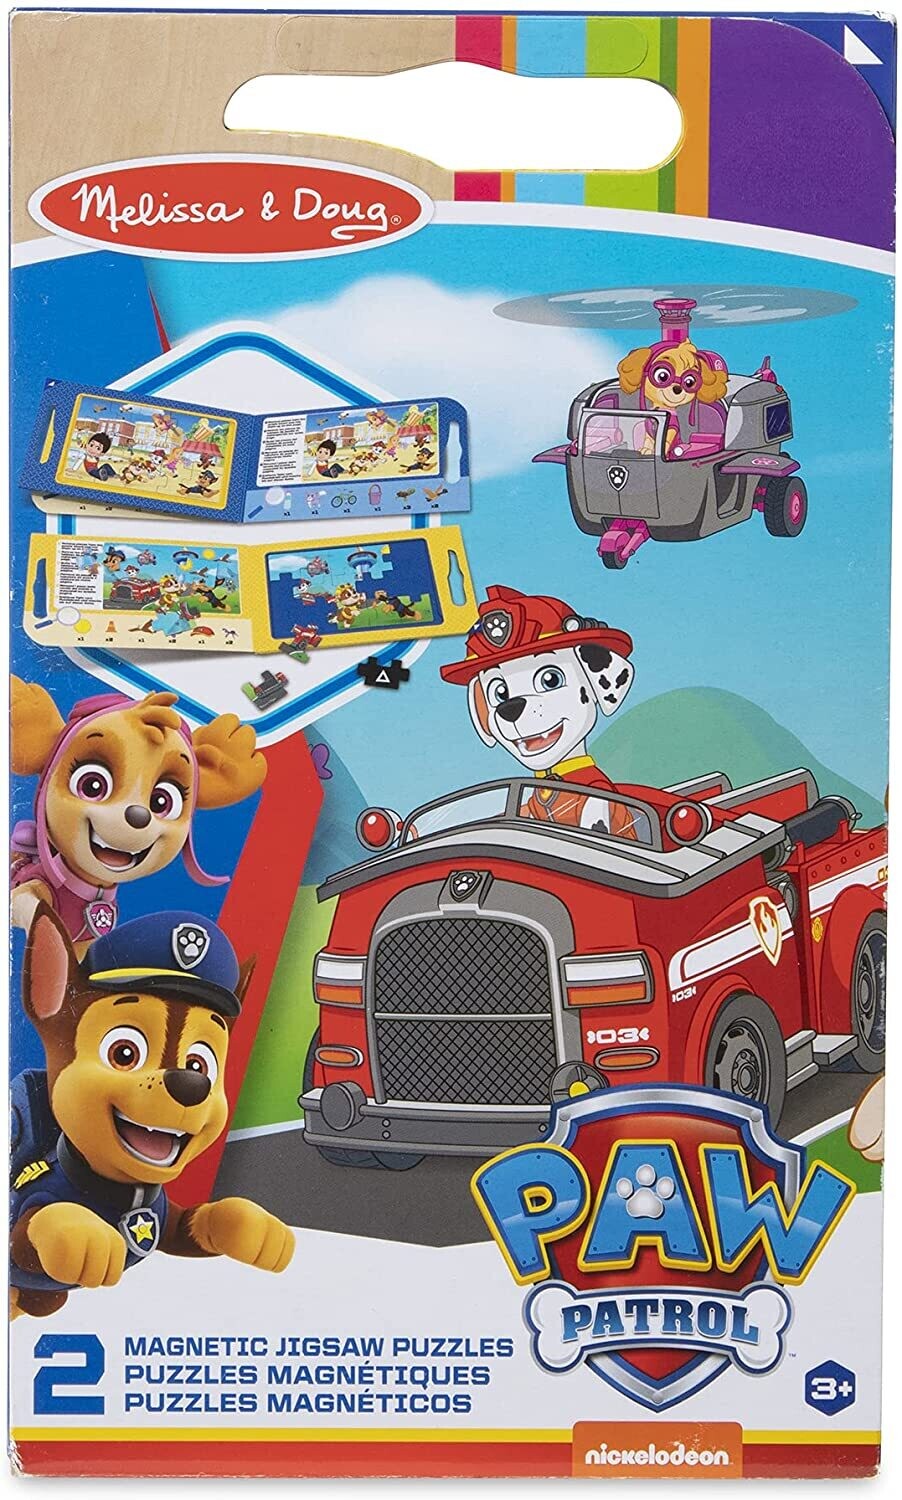 MD 33262 Paw Patrol Magnetic Jigsaw Puzzle